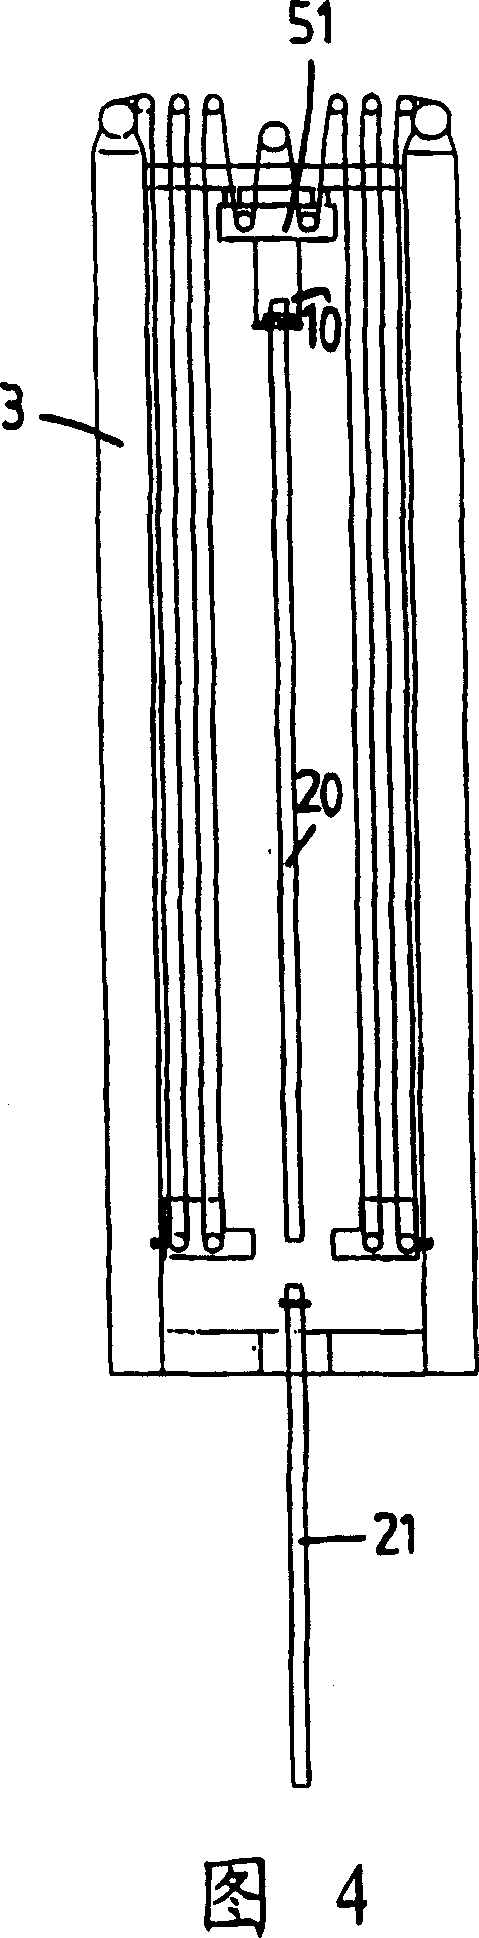 Marine pipe laying system method and hoisting device